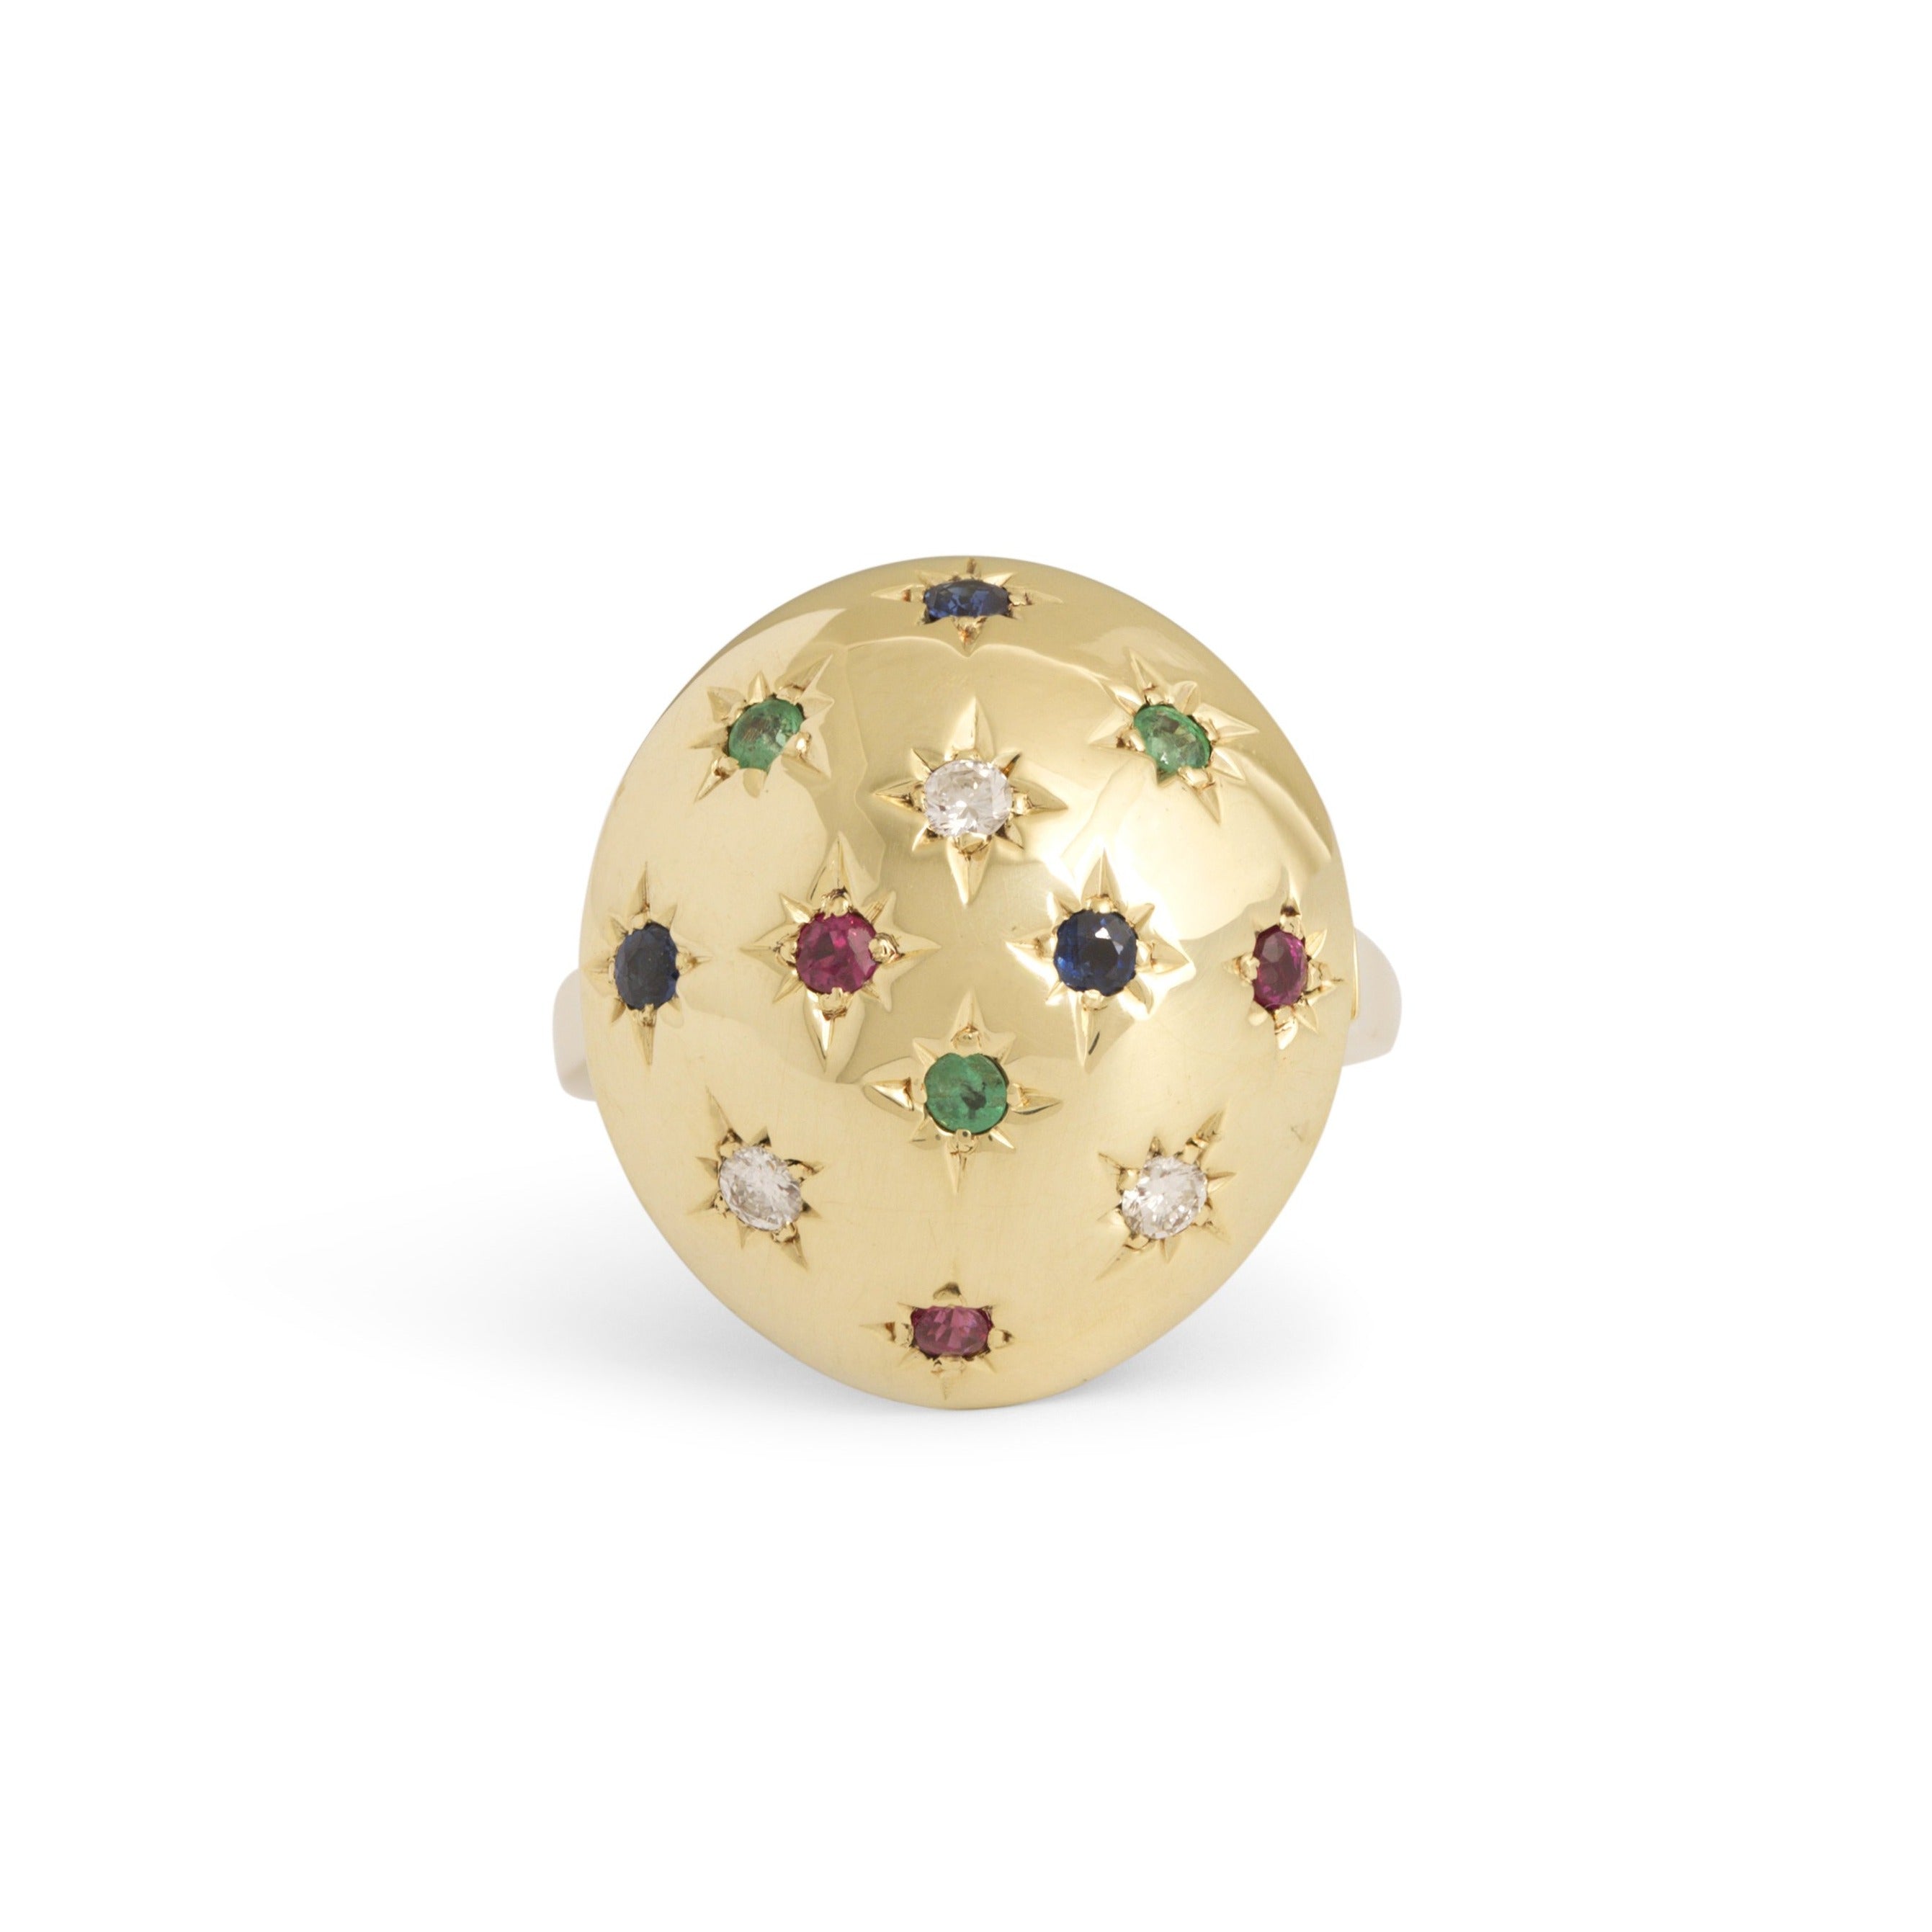 Starburst Diamond, Emerald, Ruby, and Sapphire 14k Gold Dome Ring